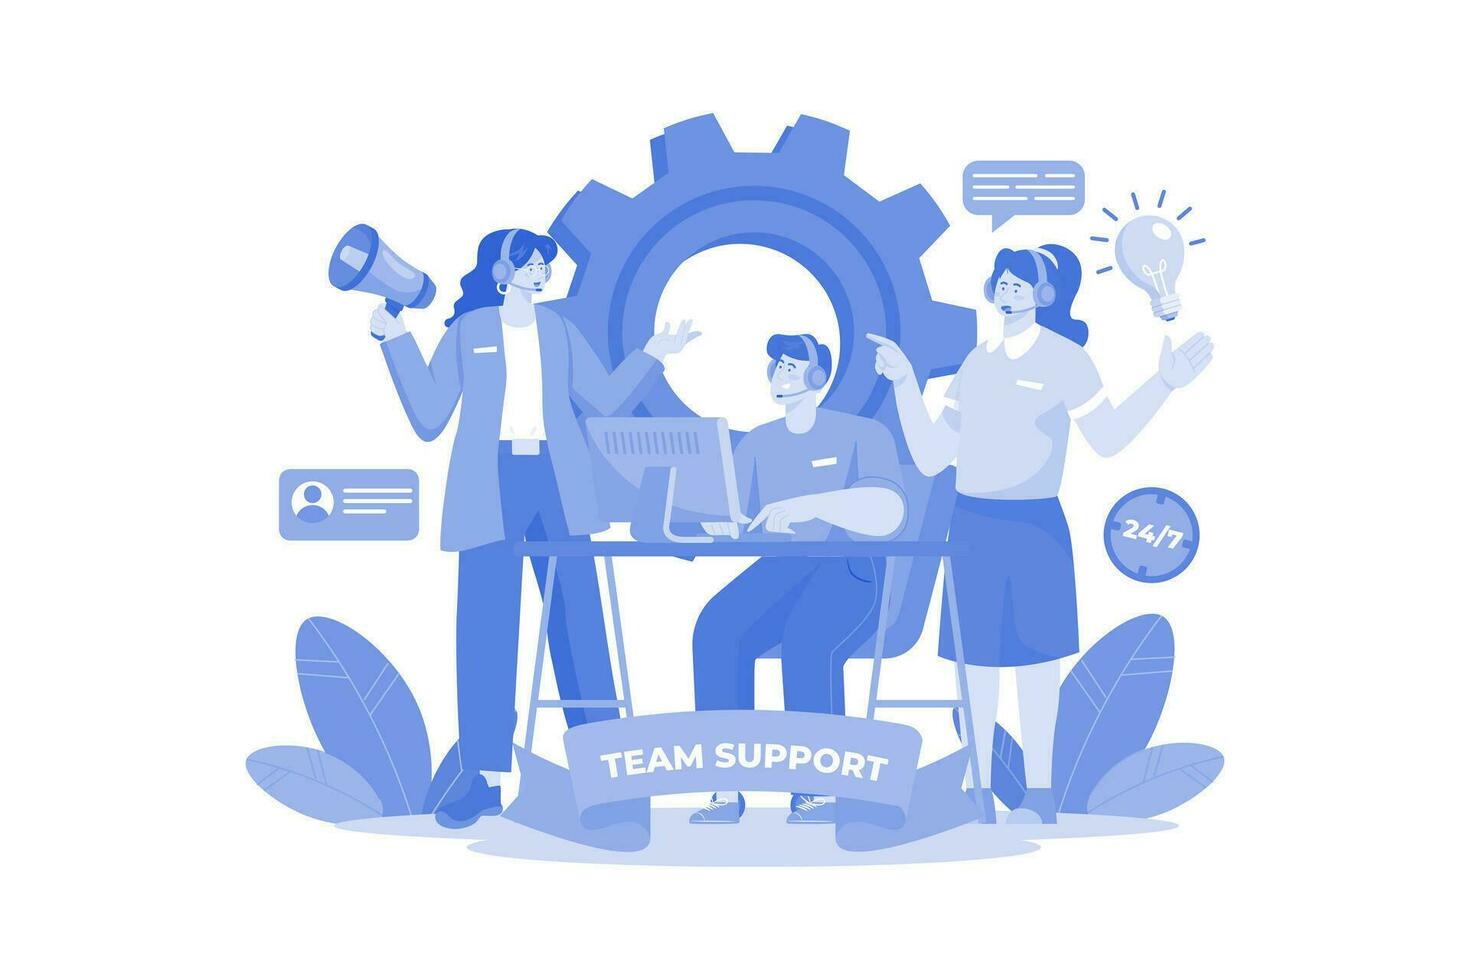 Team Support Department Advises The Customer's Office Workers. vector